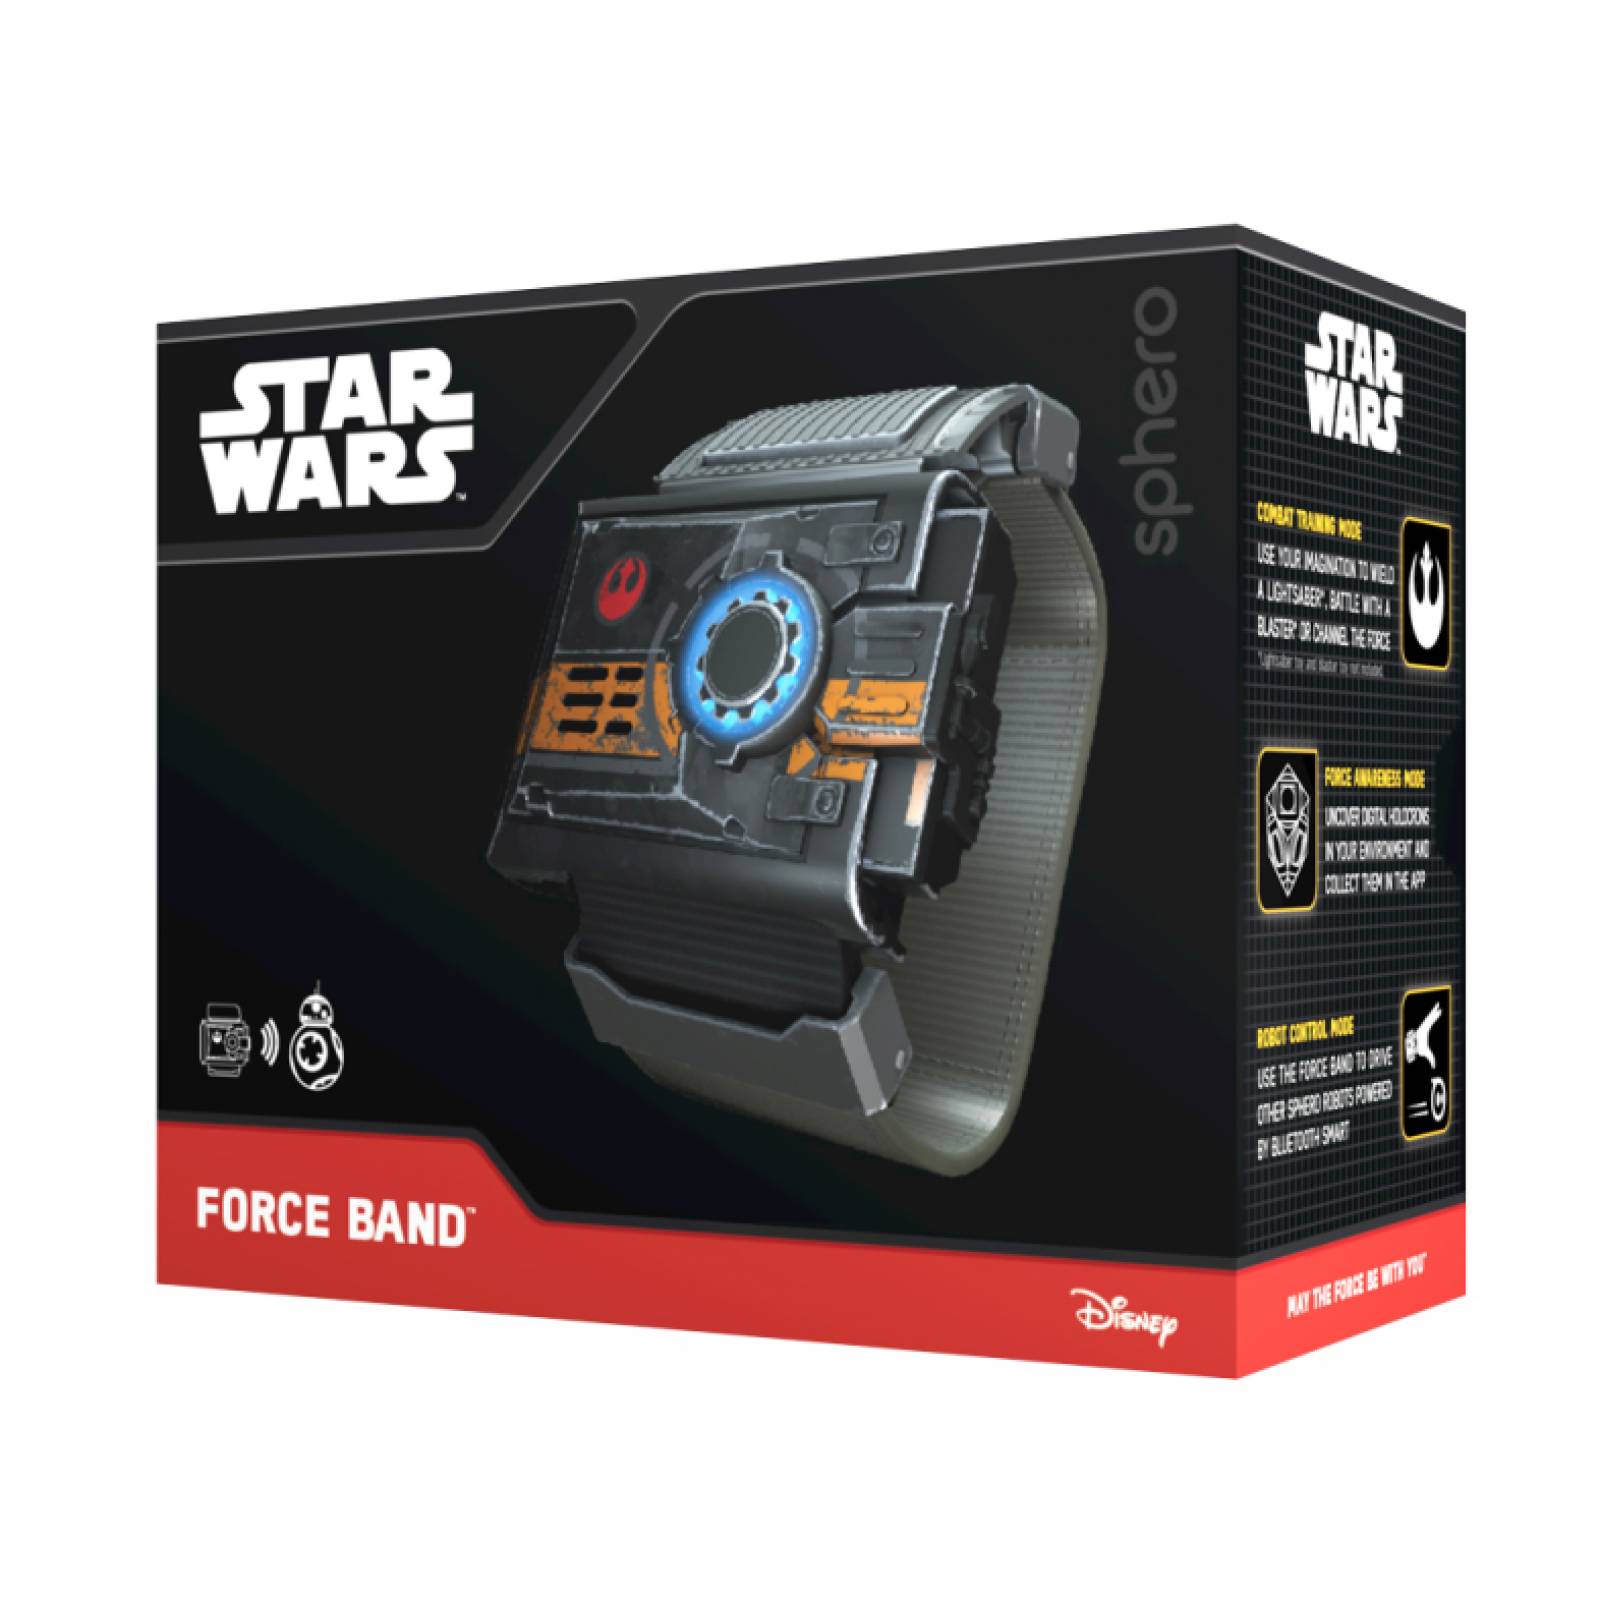 Sphero Robot Force Band Star Wars Personaje IOS Android